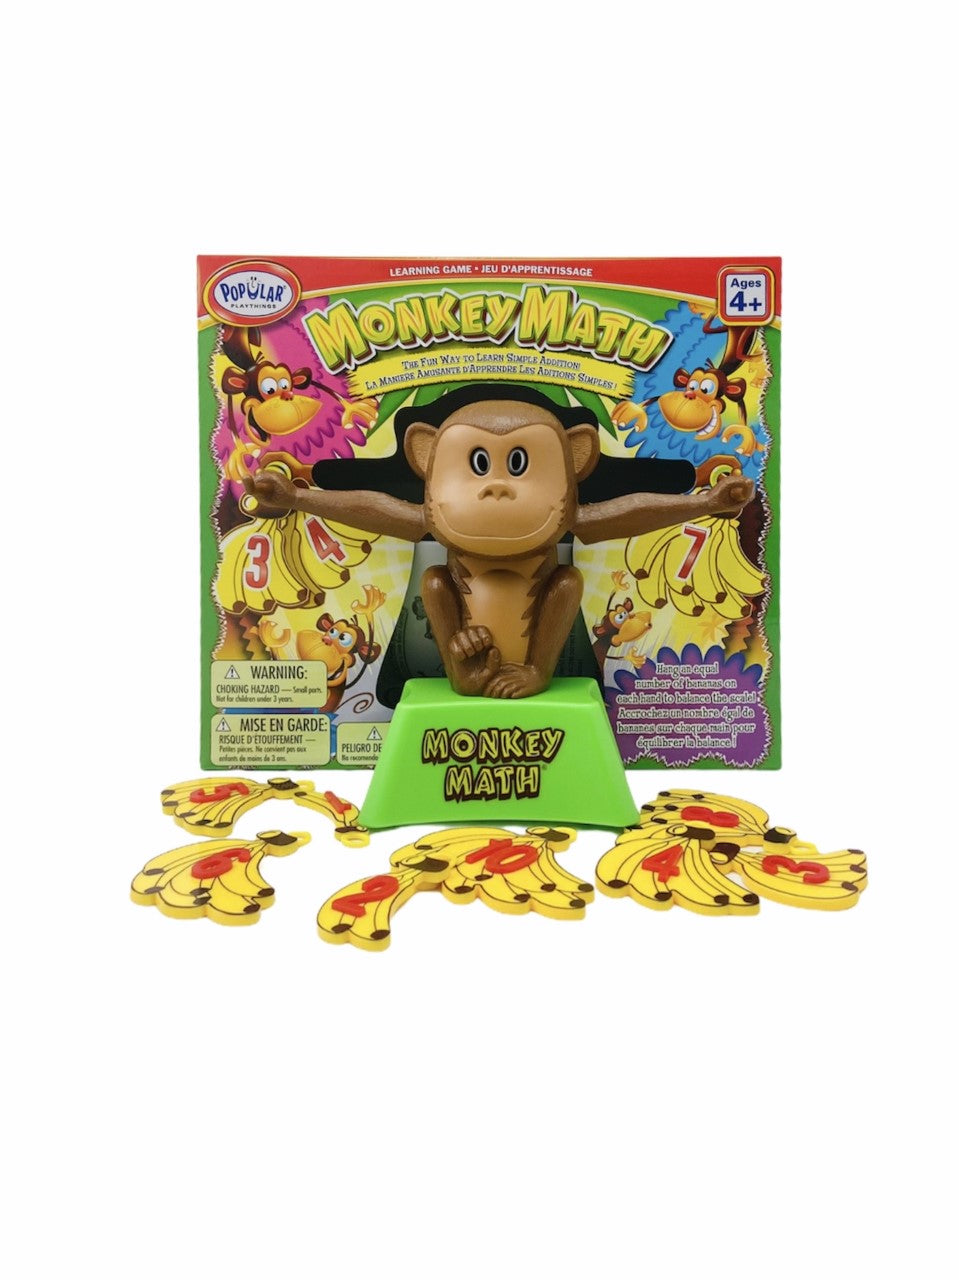 Monkey Math Game with pieces in front of packet containing the monkey math game